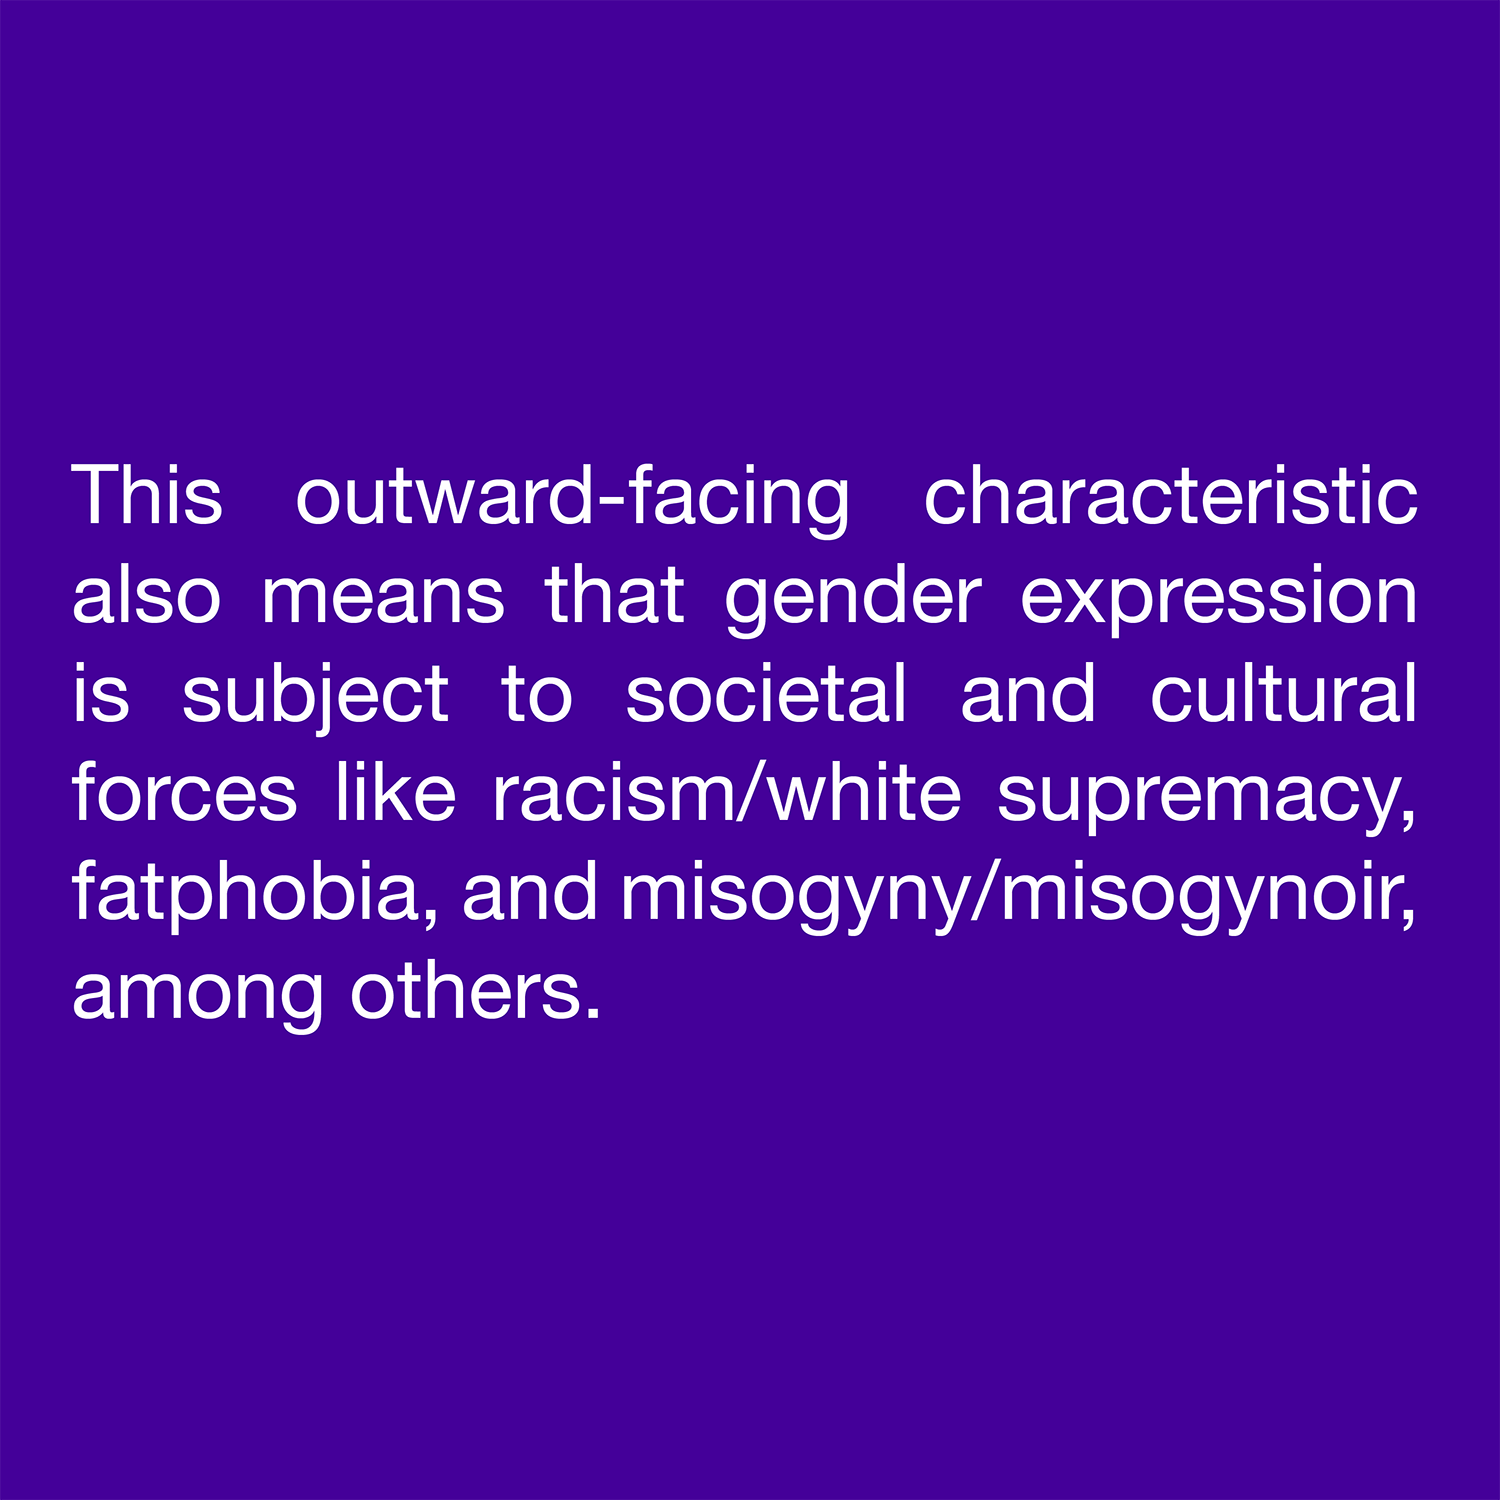  This outward-facing characteristic also means that gender expression is subject to societal and cultural forces like racism/white supremacy, fatphobia, and misogyny/misogynoir, among others. 